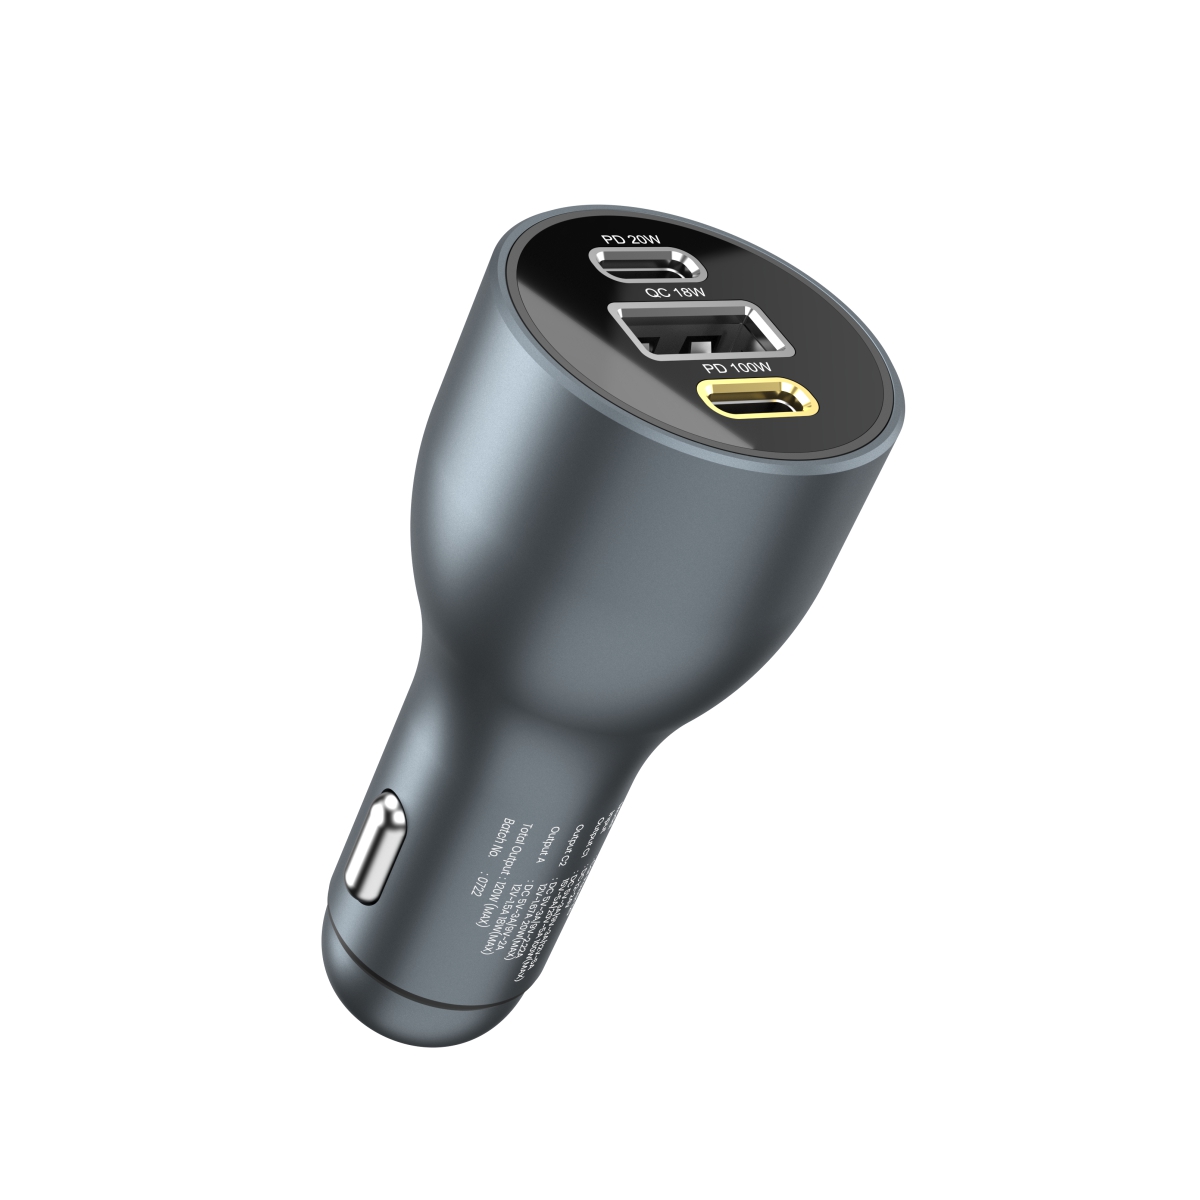 Portronics Car Power 120 - Car Charger with triple charging Port,Grey (POR 1676)